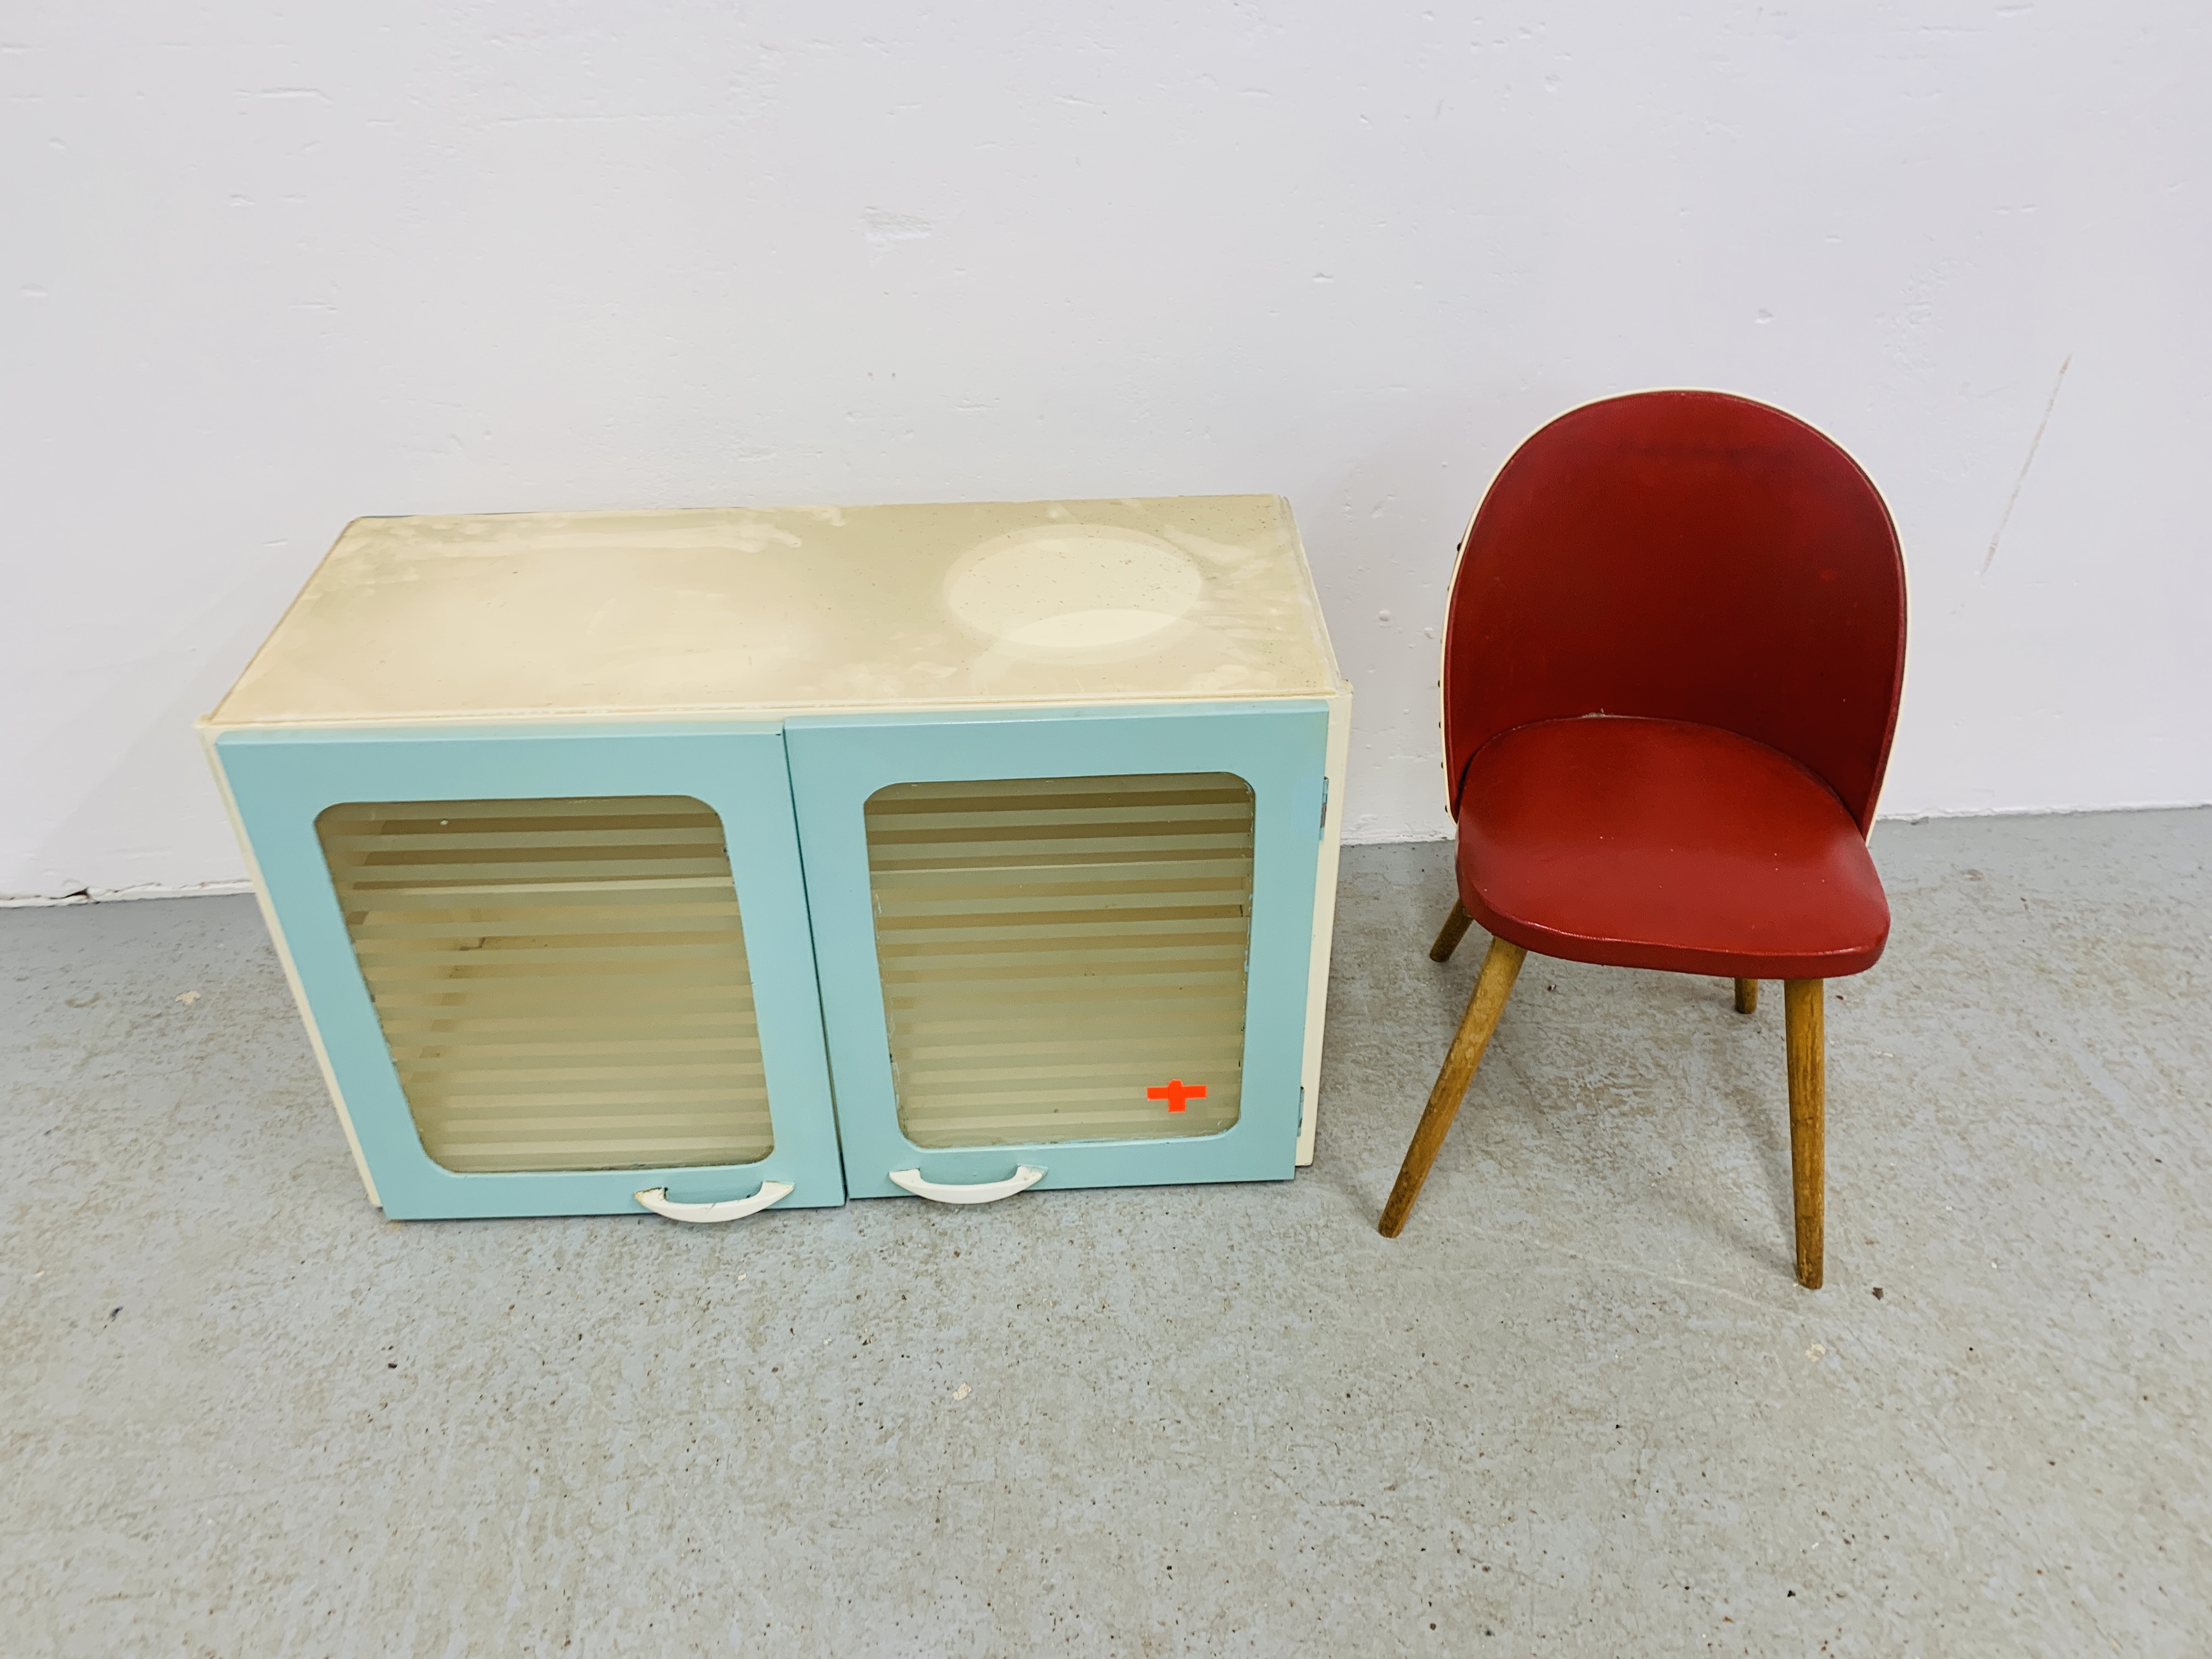 A 1940'S 2 DOOR KITCHEN CABINET ALONG WITH 1940'S RED CHILD'S CHAIR